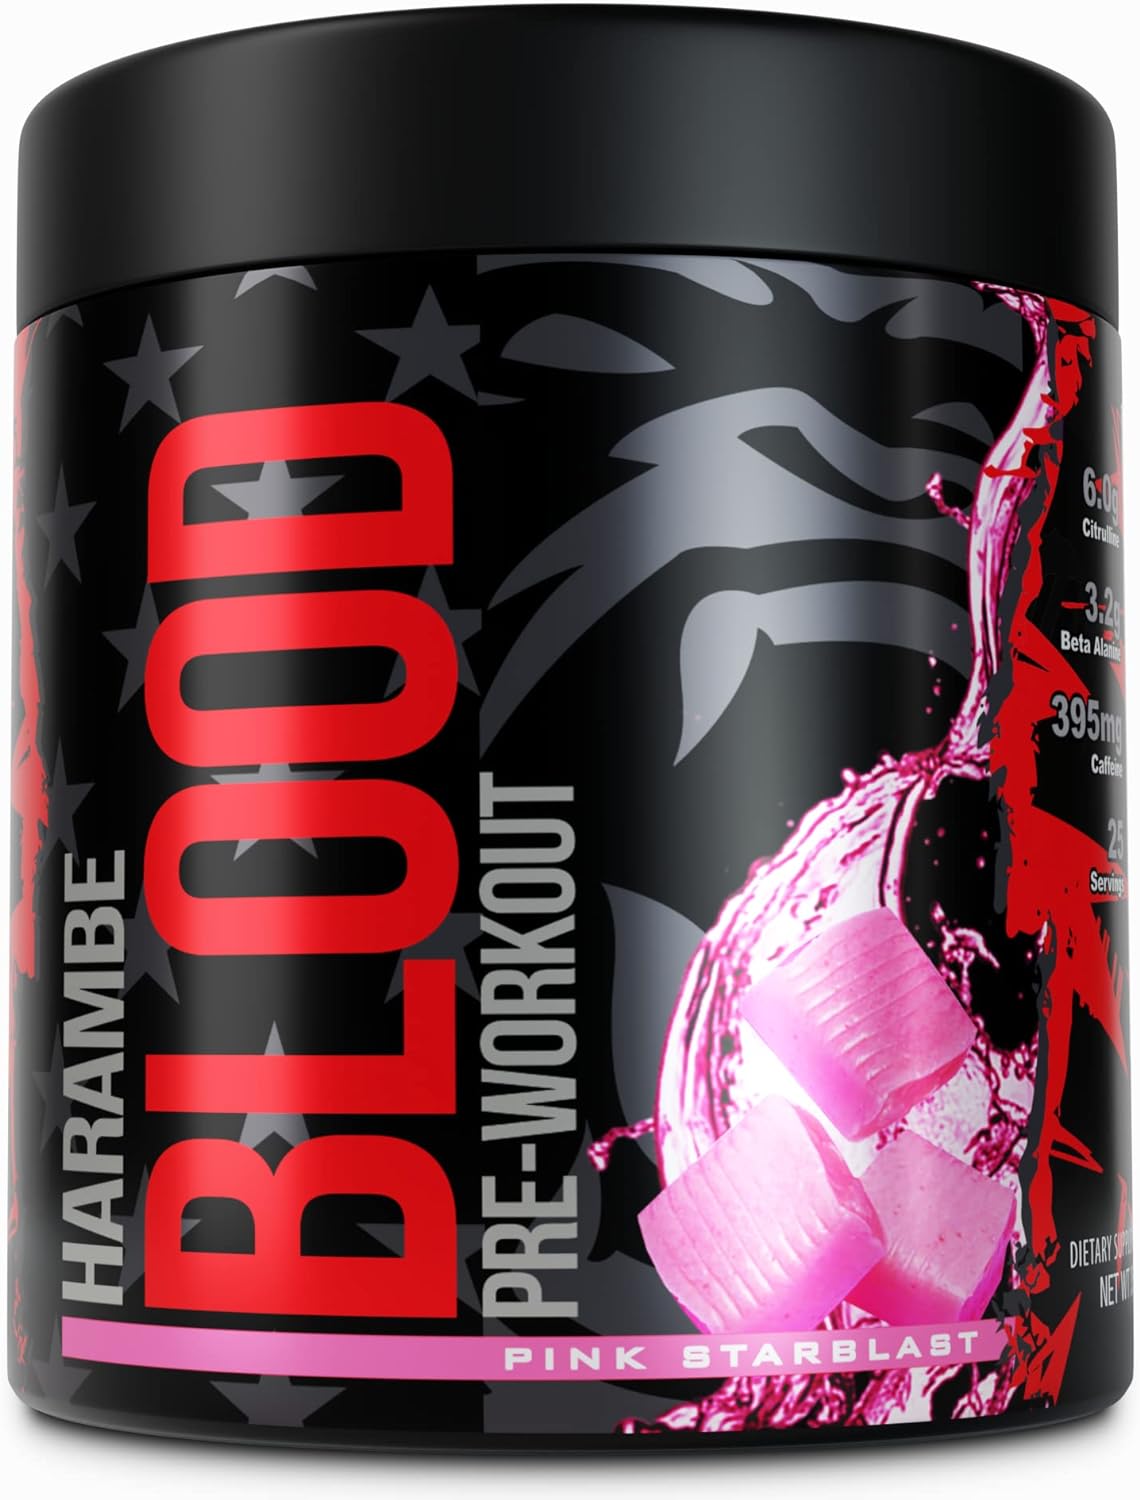 Harambe Blood Pre-Workout by LMNitrix